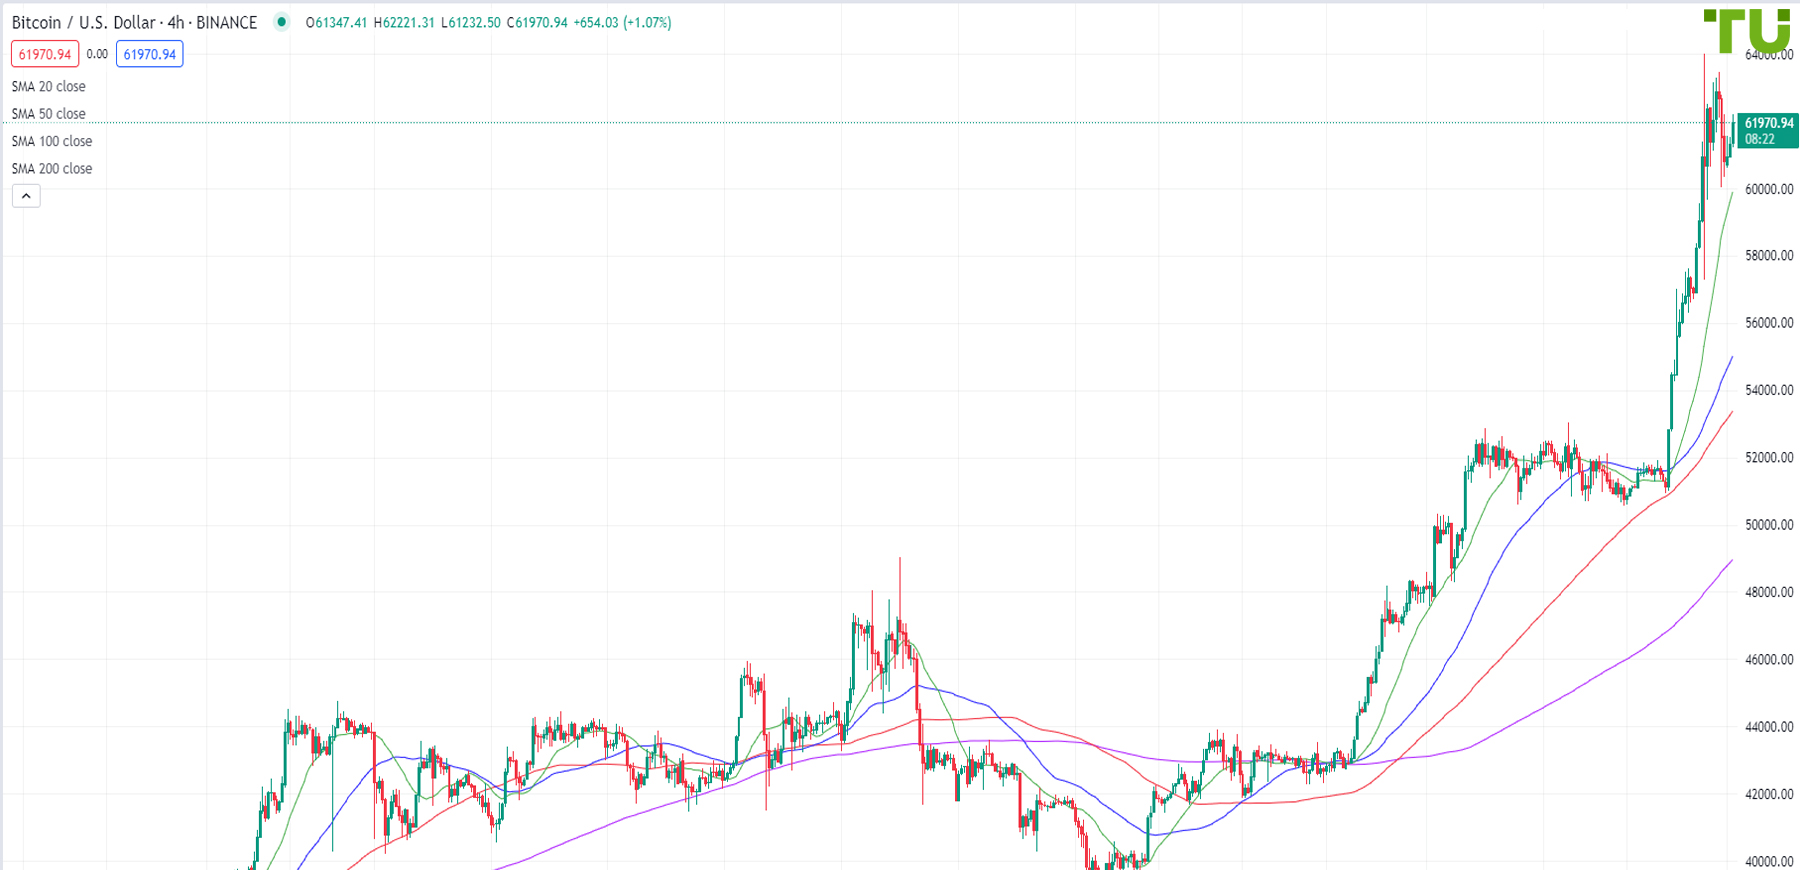 BTC/USD is approaching historical highs